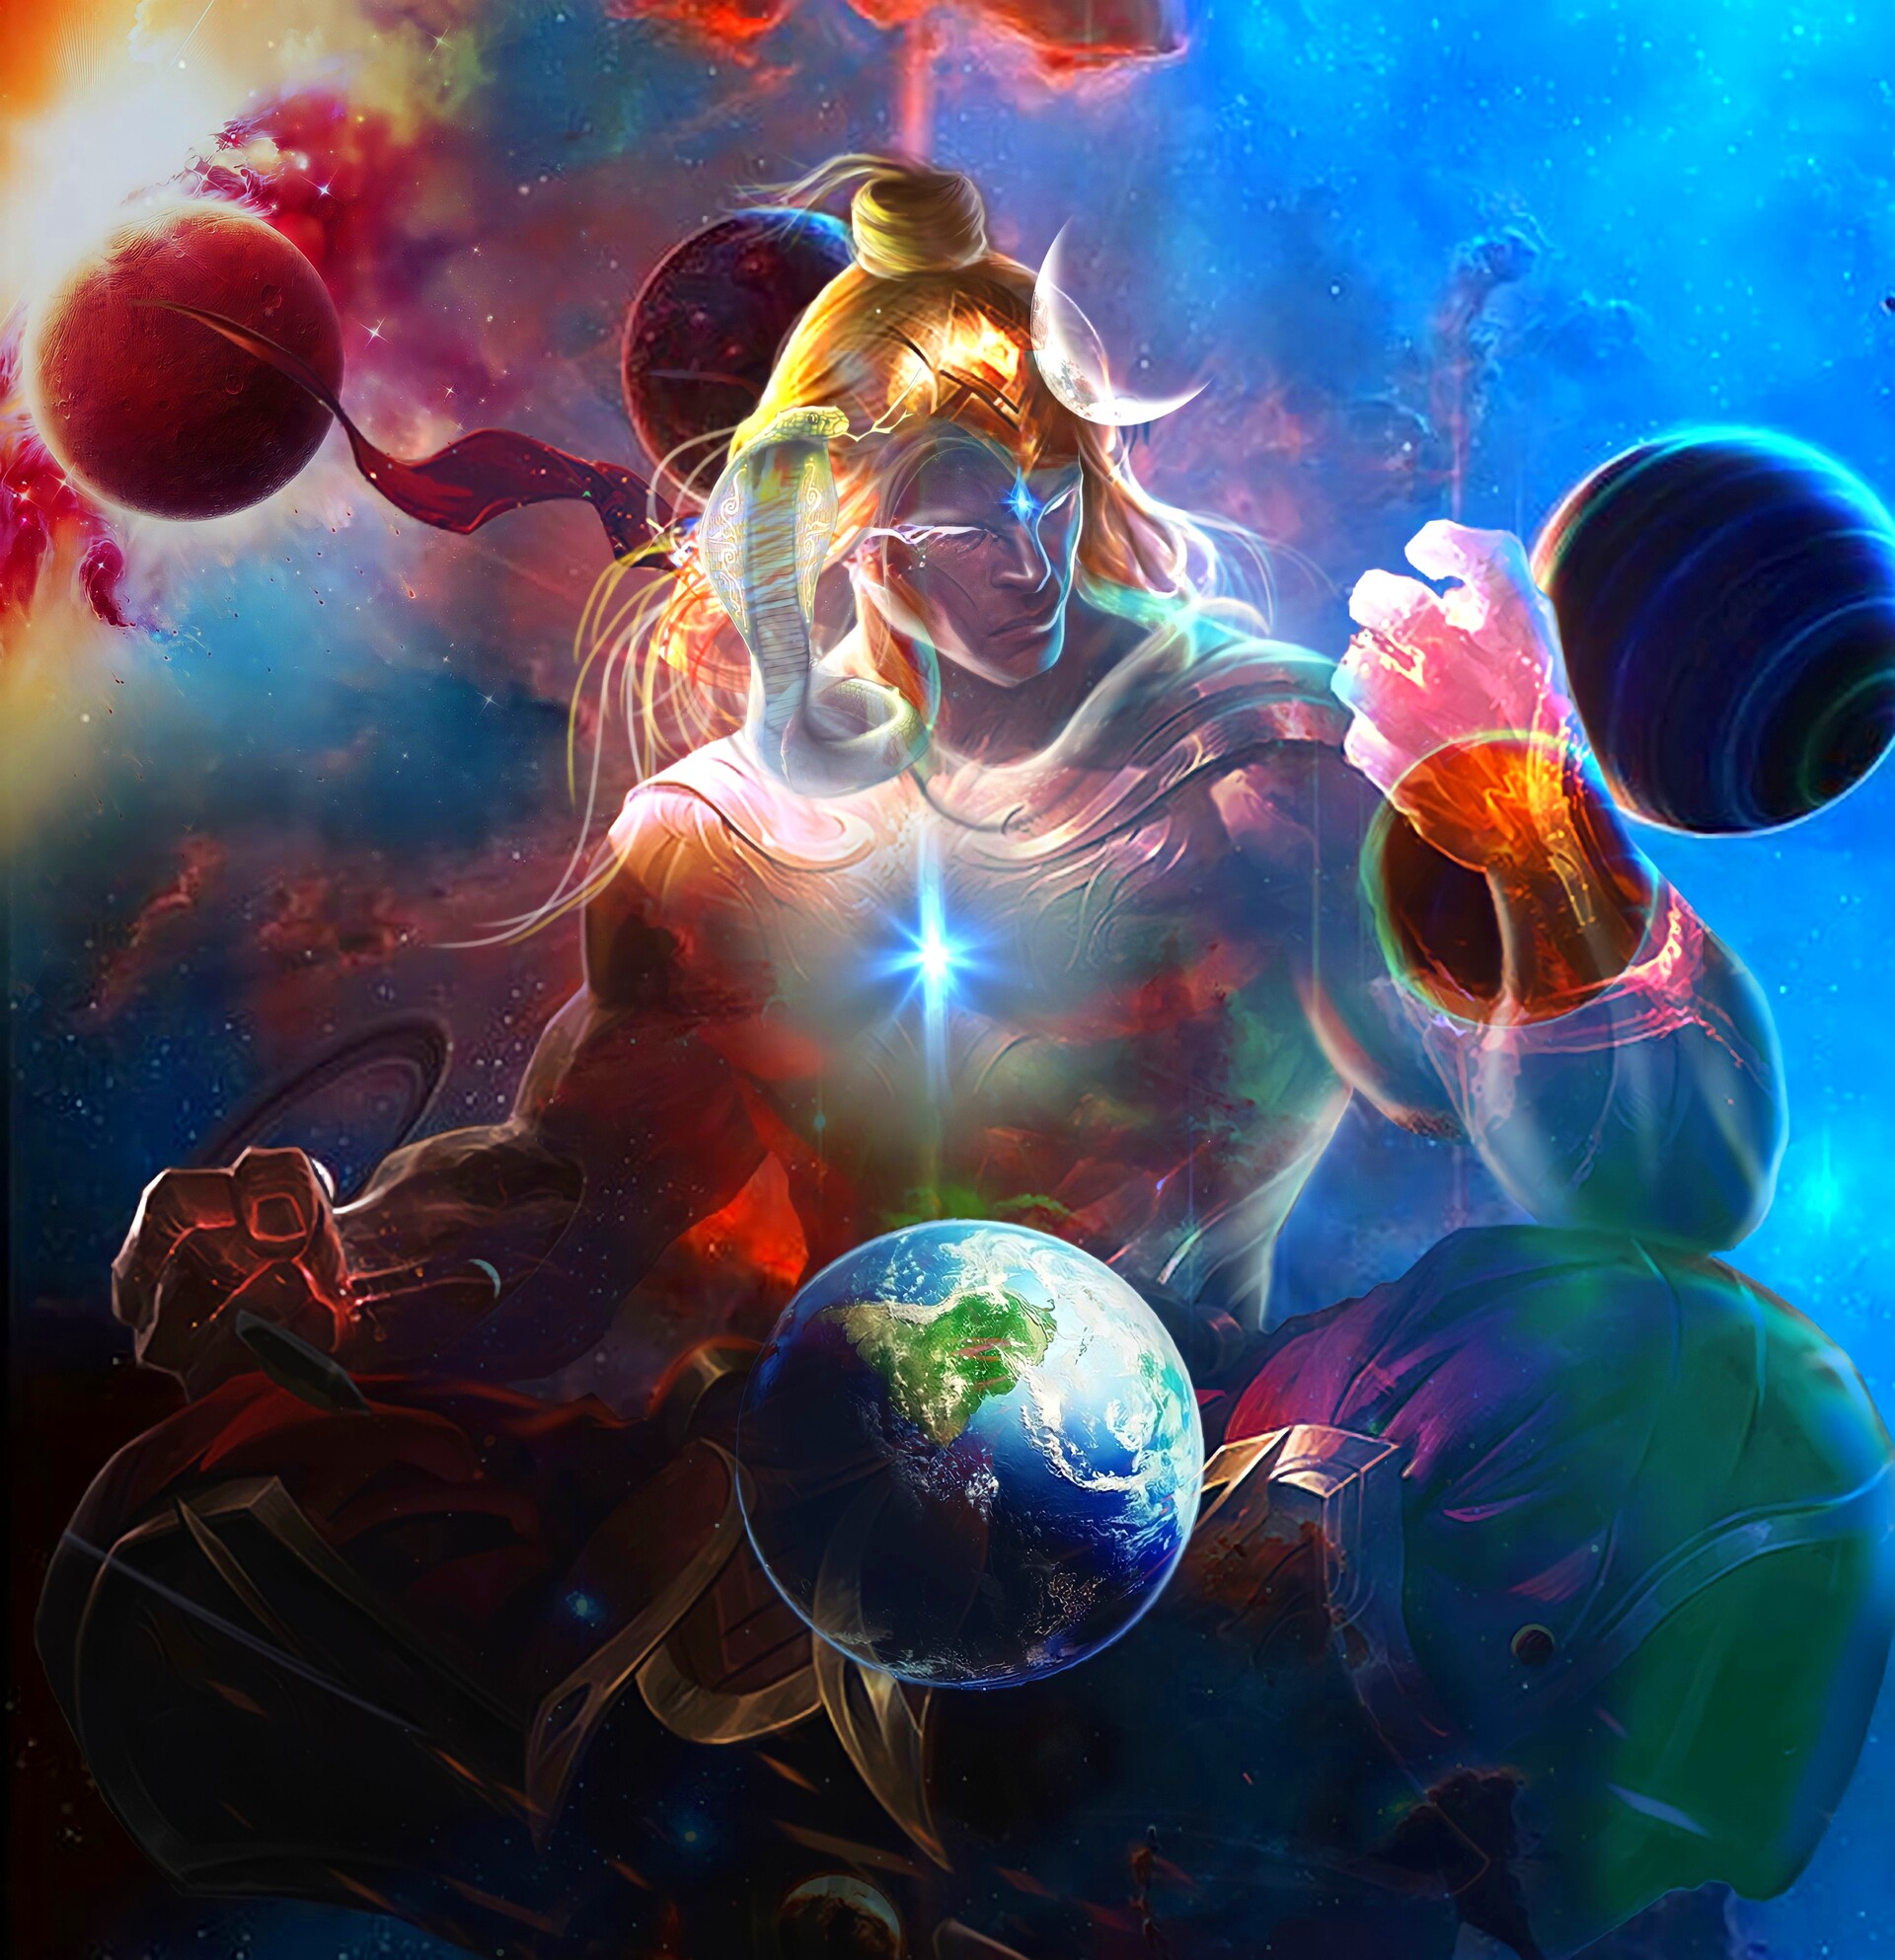 Lord Shiva and Parvati in Cosmic Galaxy in creative art painting wallpaper   Lord shiva painting Hindu art Painting wallpaper